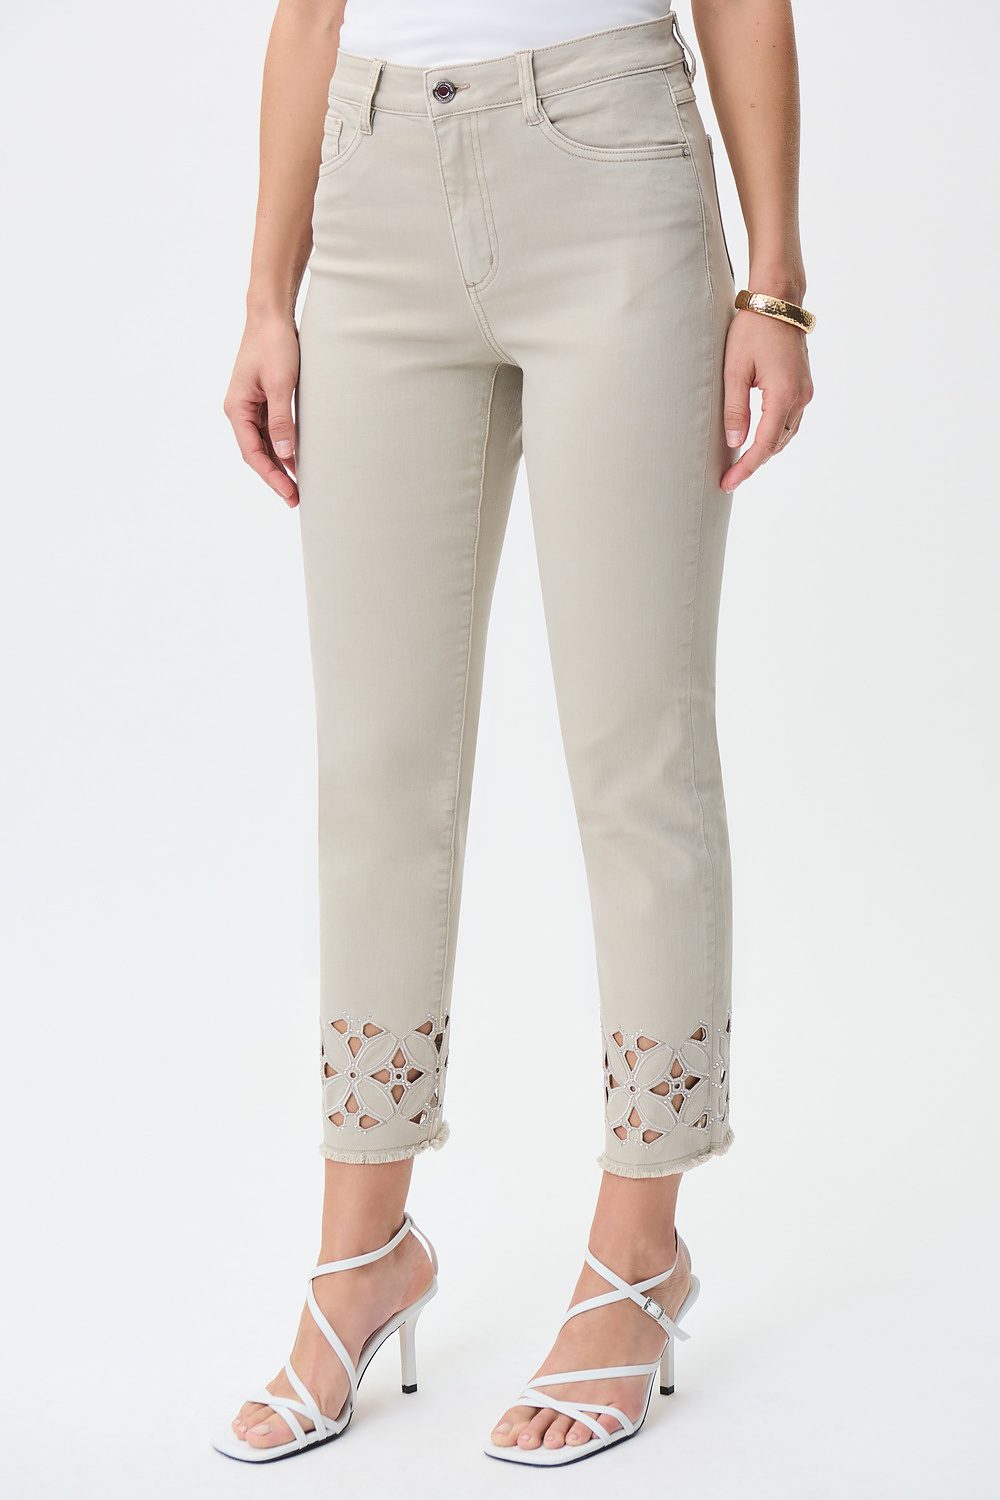 Cut-Out Detail Pants Style 231960. Moonstone